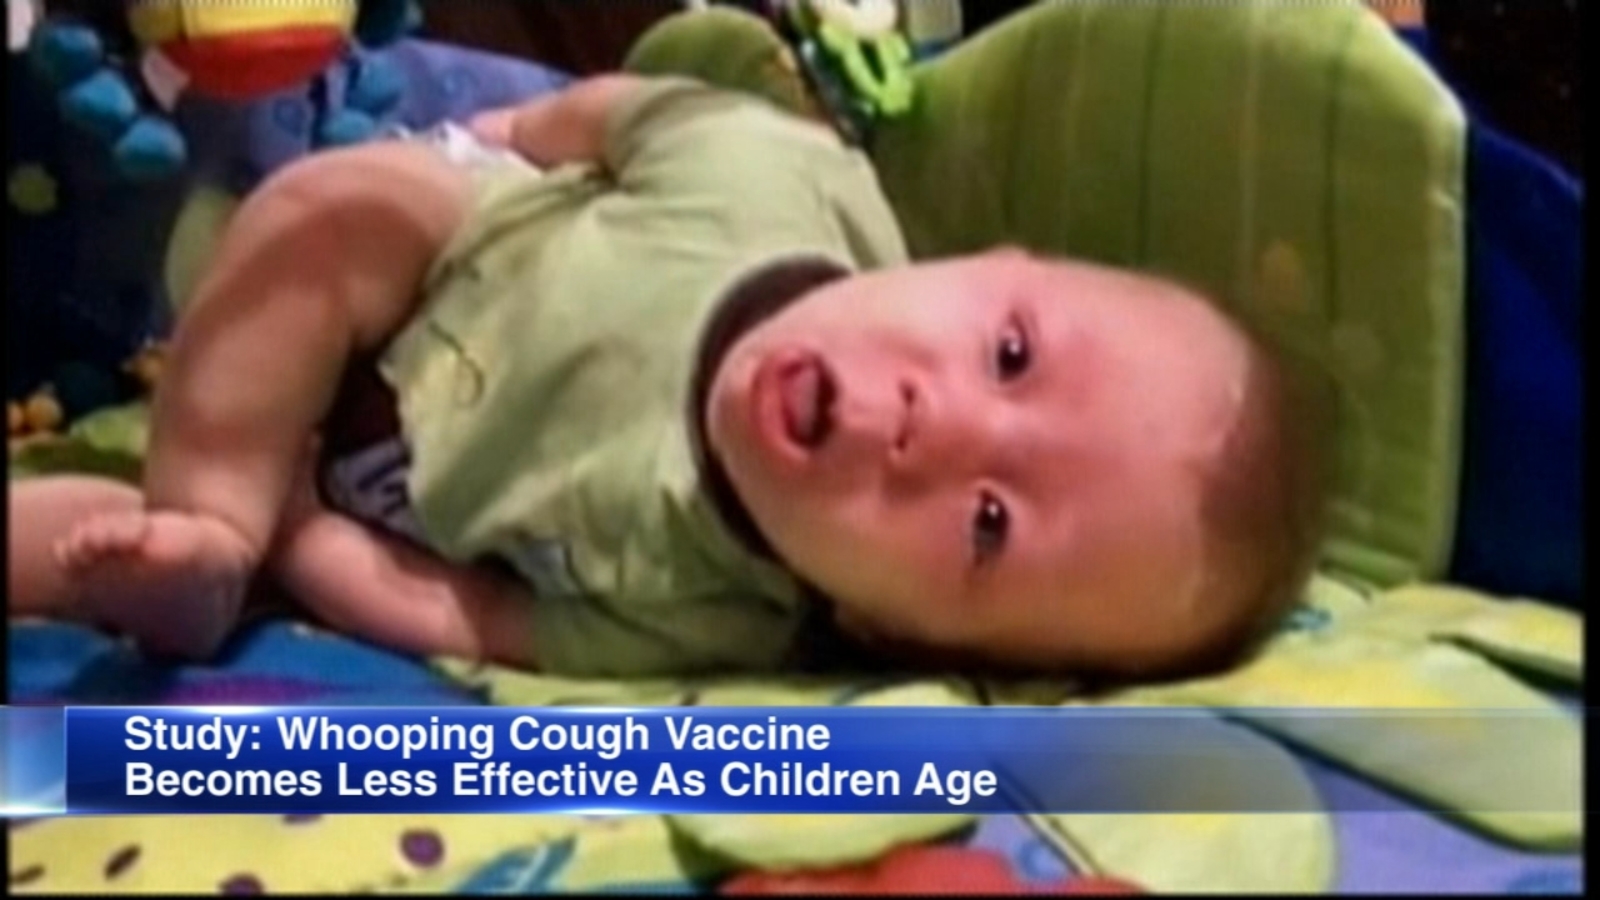 The Importance Of Getting The Whooping Cough Vaccine: Facts And Benefits